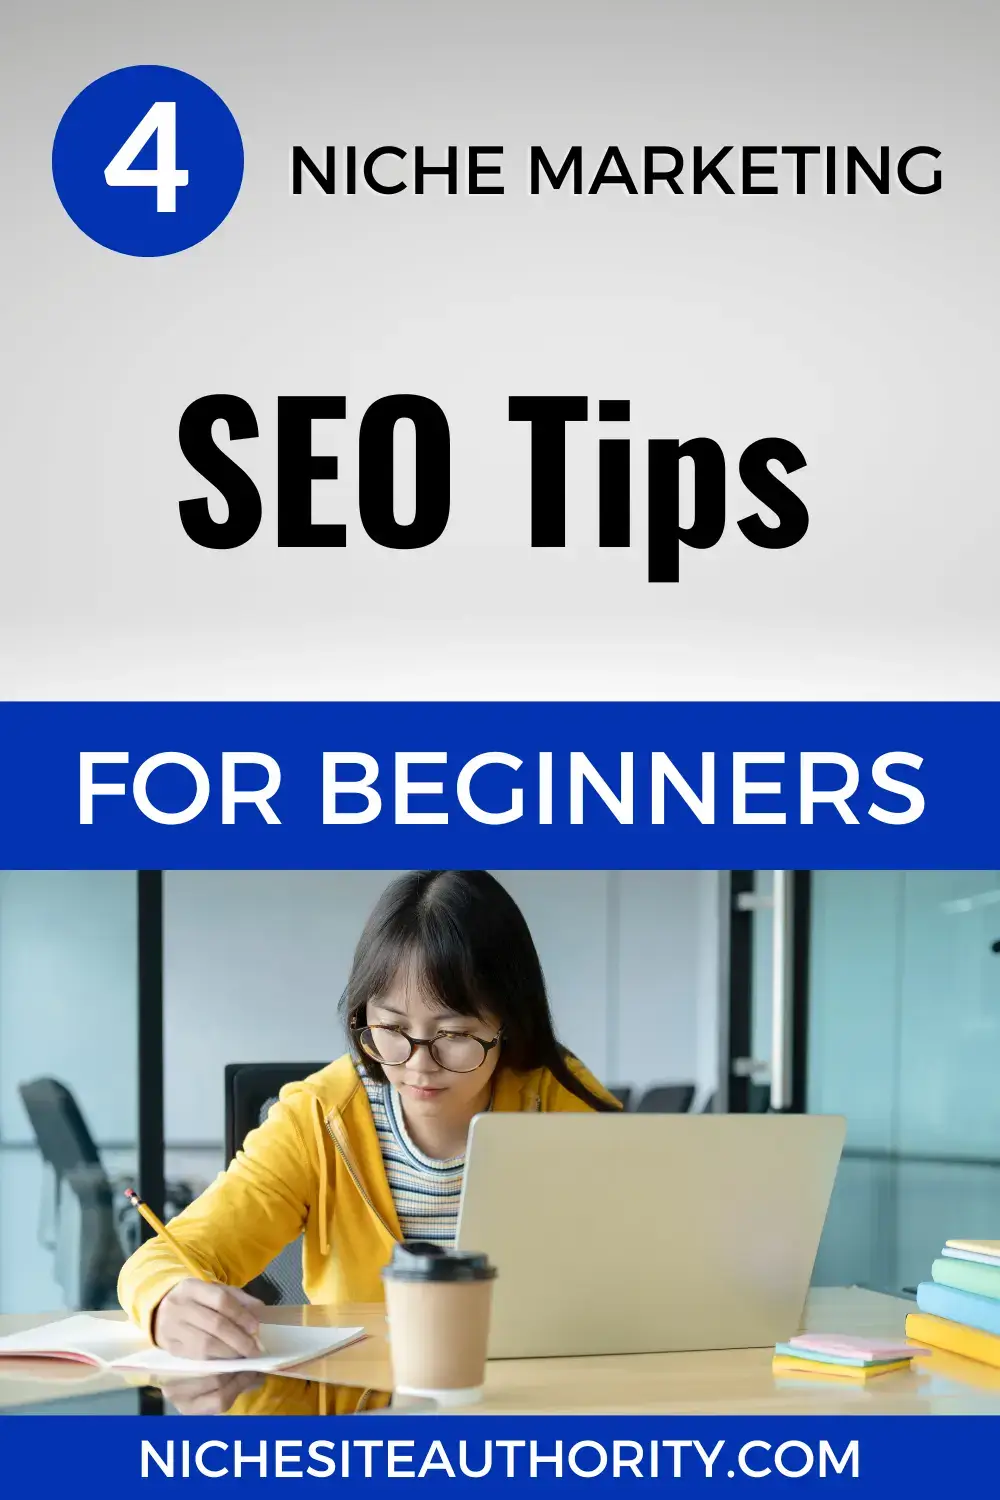 You are currently viewing 4 Niche Marketing SEO Tips For Beginners